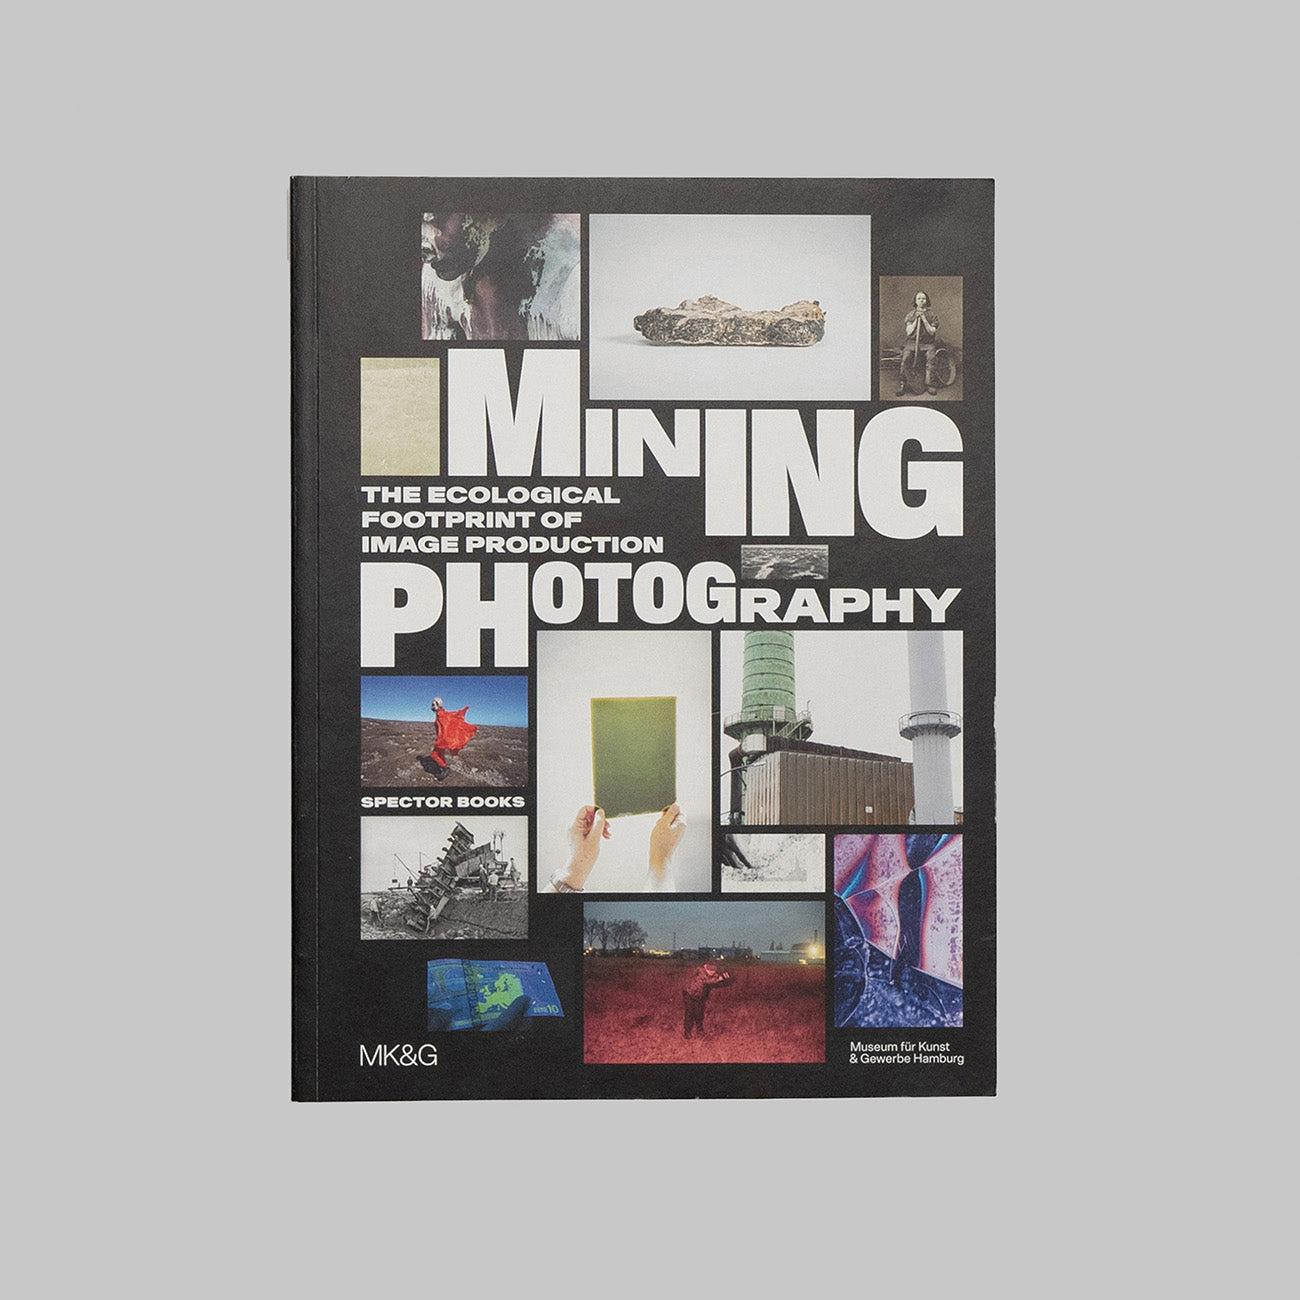 MINING PHOTOGRAPHY: THE ECOLOGICAL FOOTPRINT OF IMAGE PRODUCTION